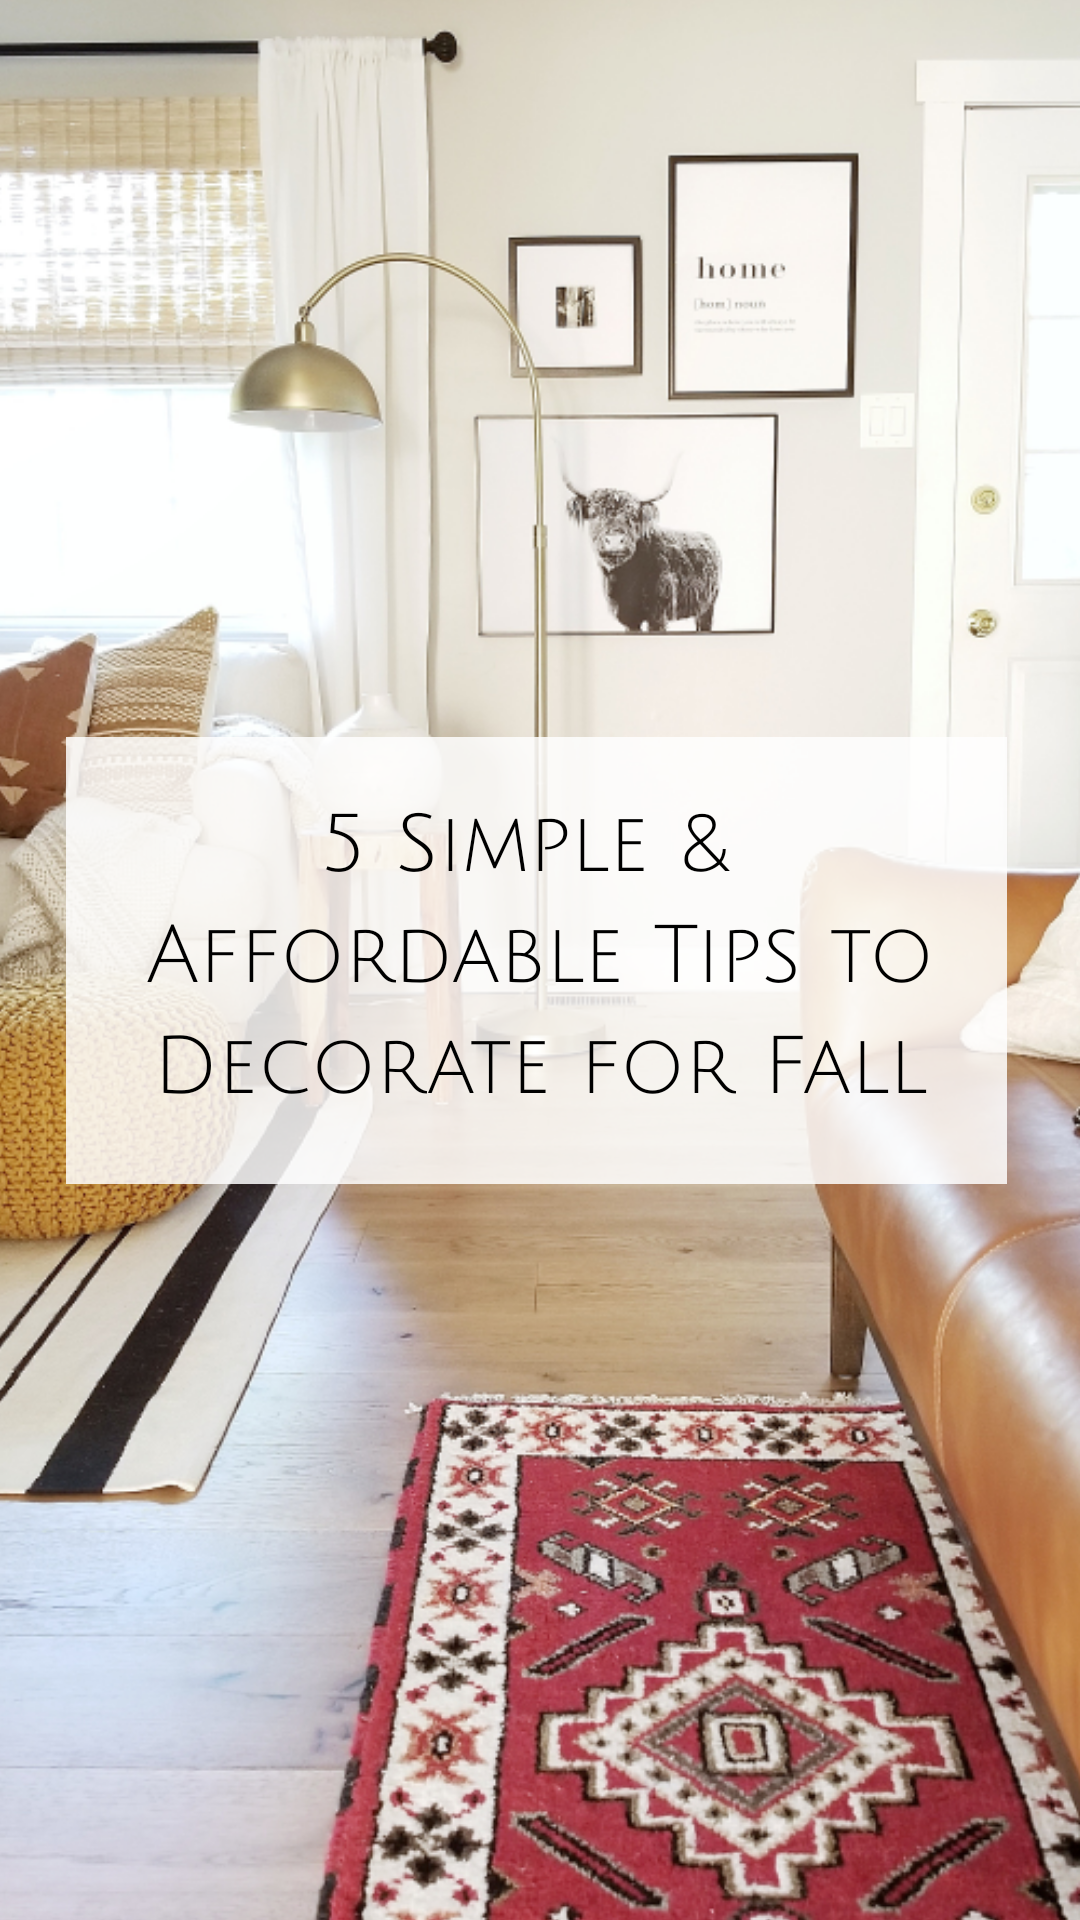 5 Simple & Affordable tips for fall home decor by Cynthia Harper.